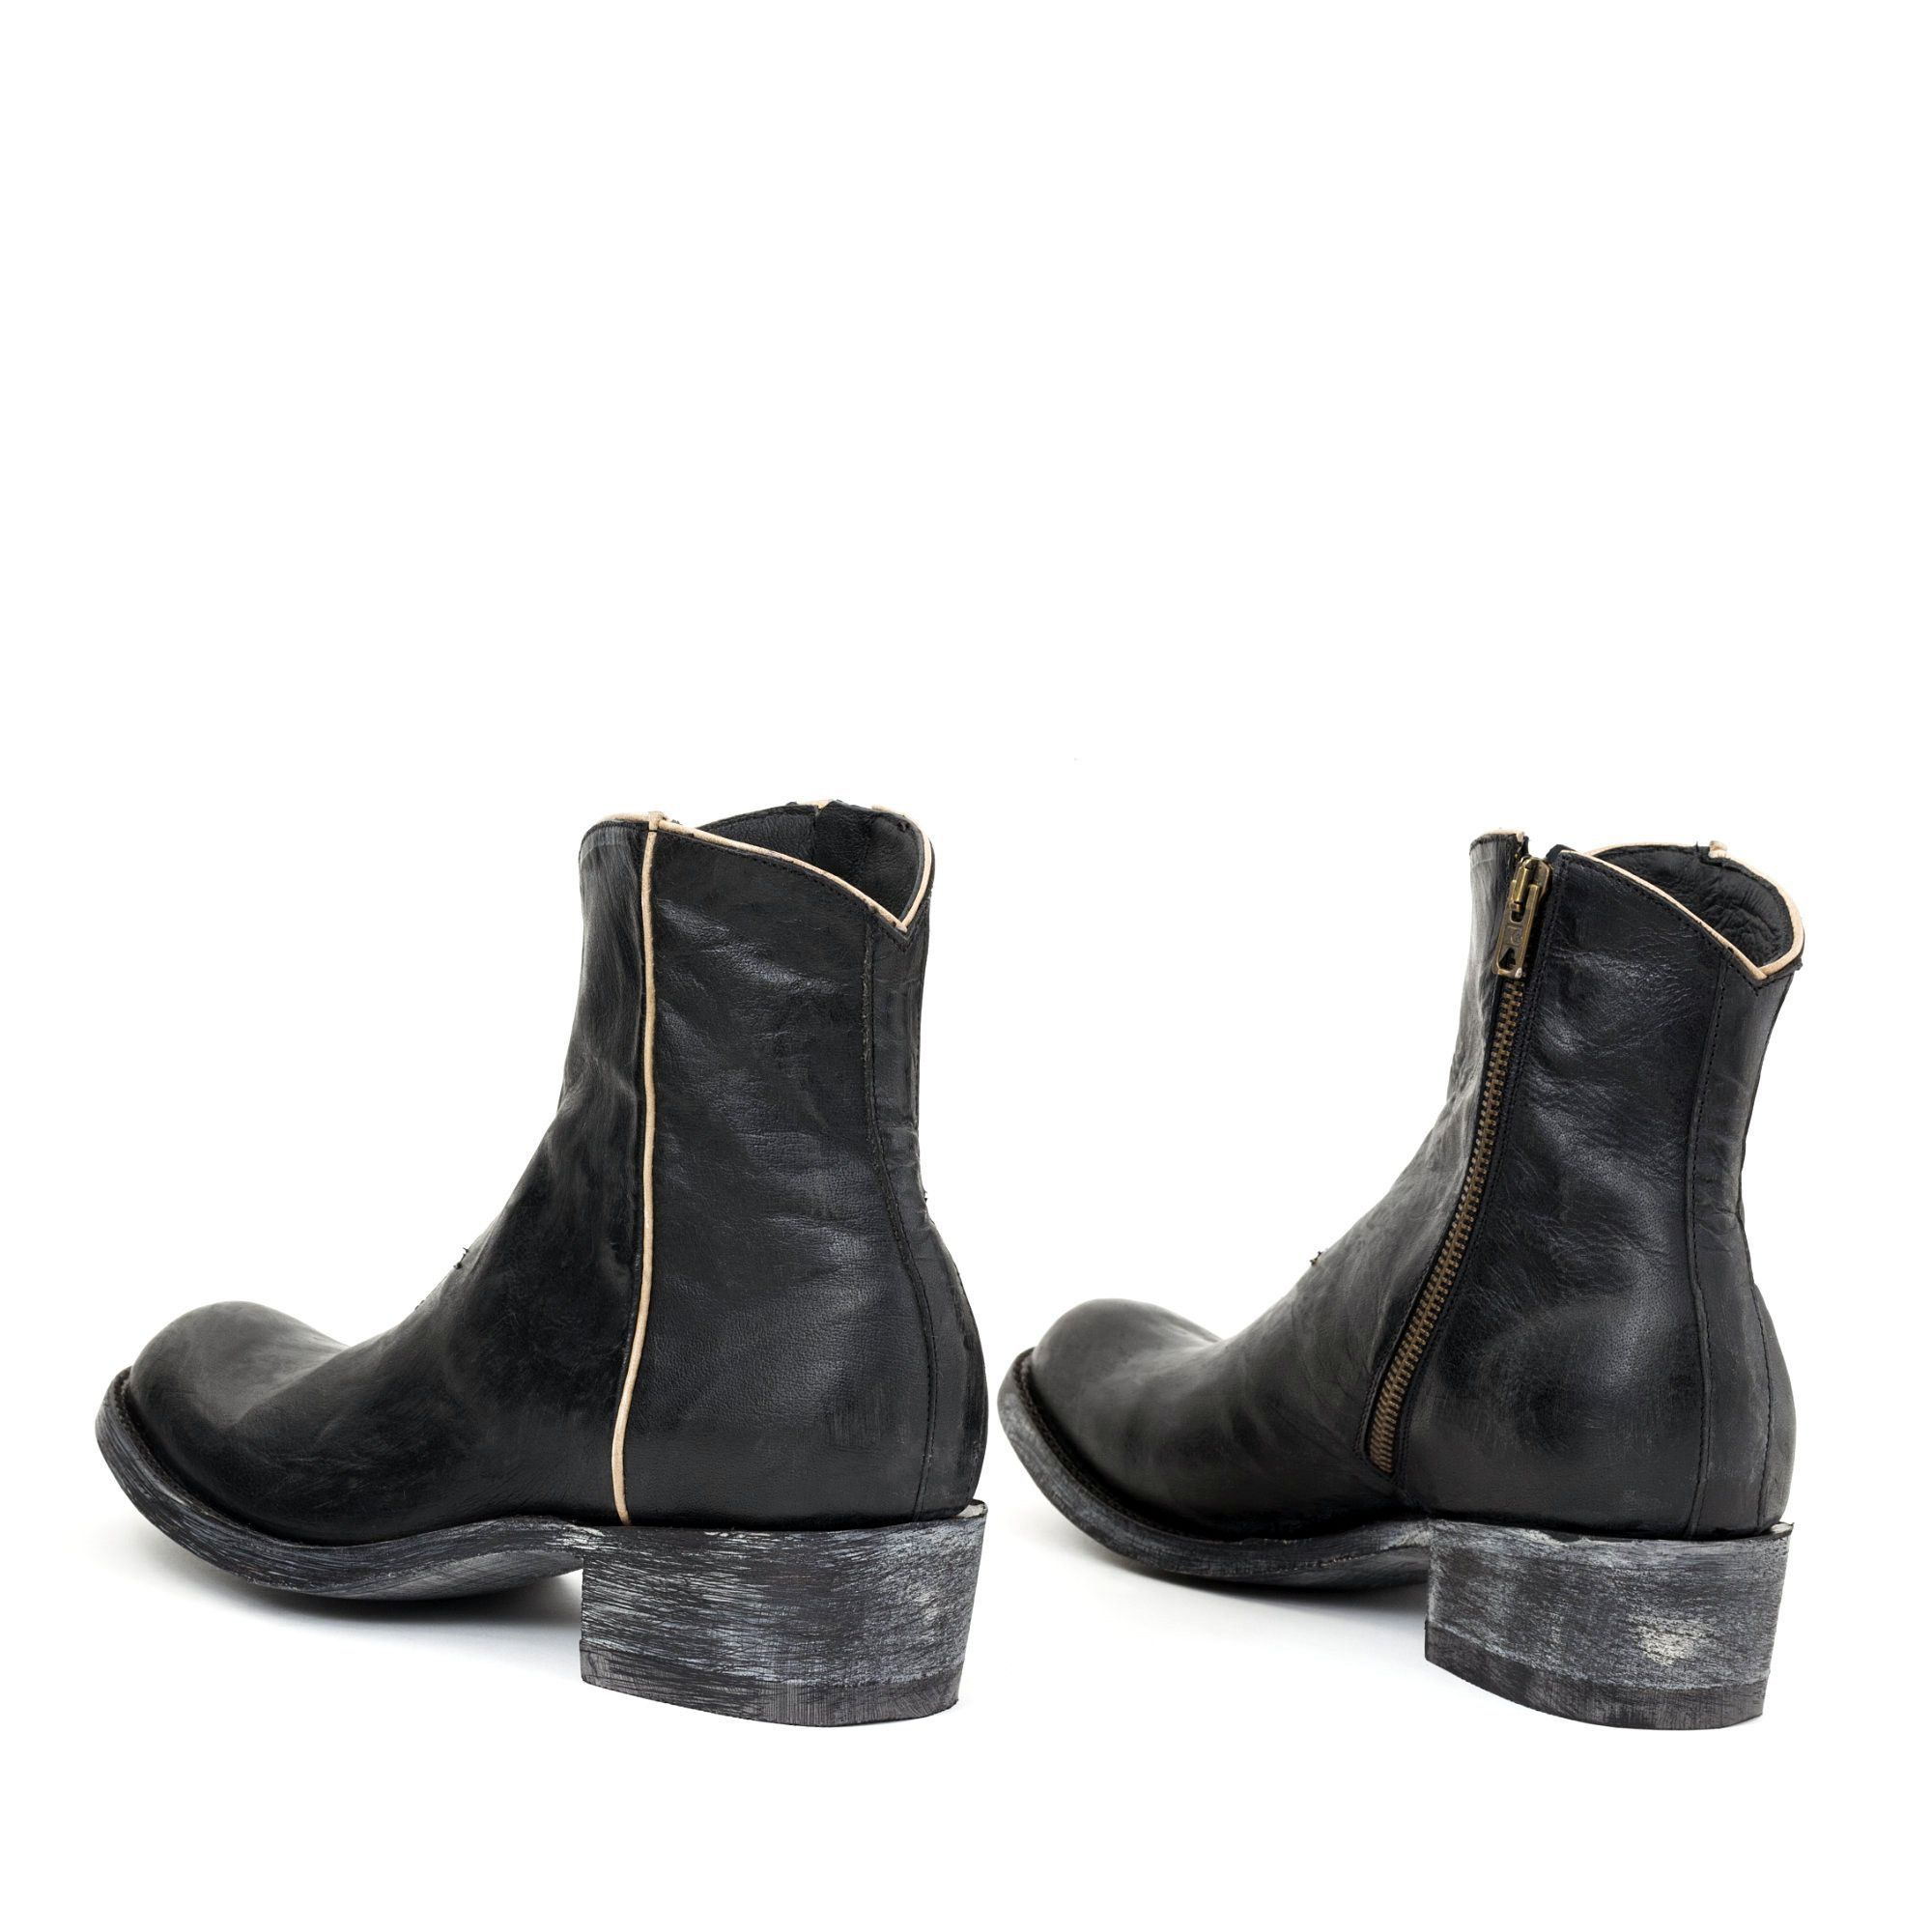 STAR BLACK / BONE ROUNDED TOE ANKLE BOOTS WITH STAR  AND SIDE ZIP CLOSURE  Total heel height 1.8 Inches  100% cow leather  Color